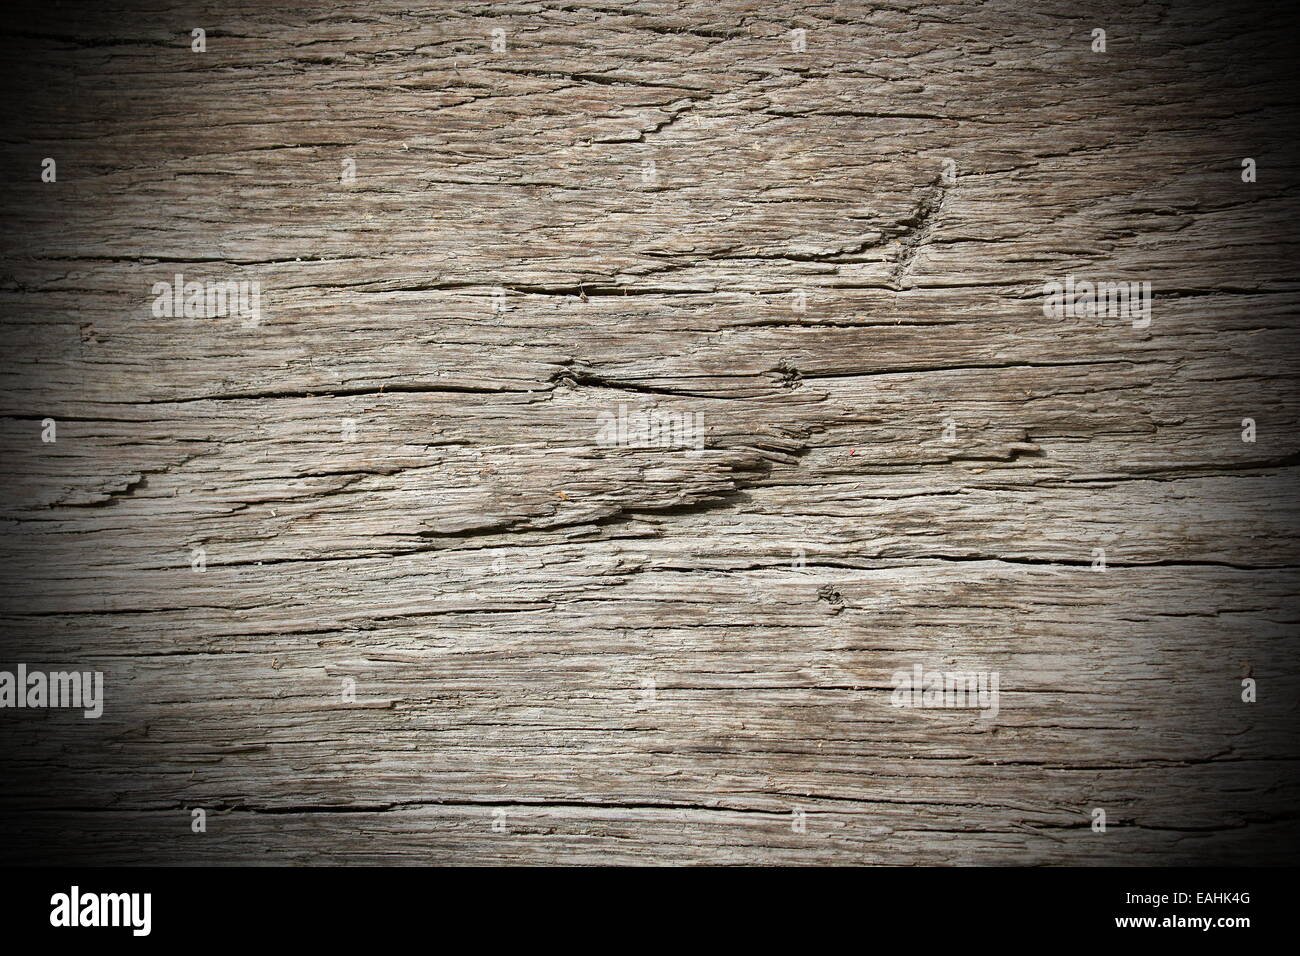 detail on ancient oak wooden beam with vignette Stock Photo